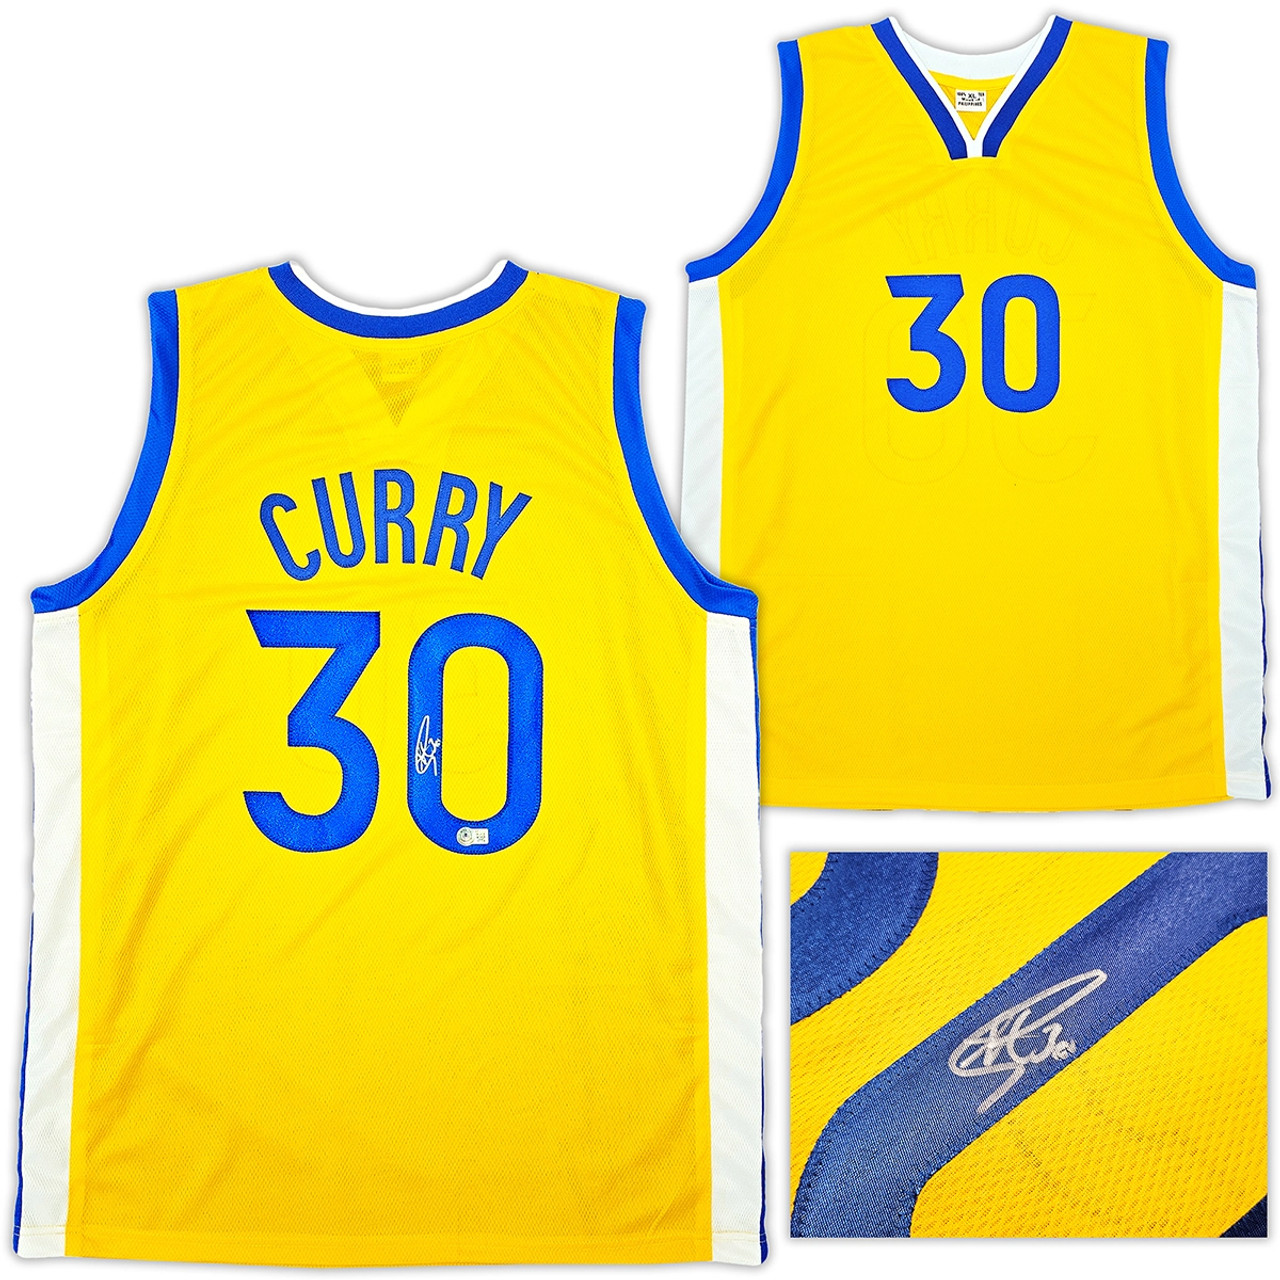 Stephen Curry Signed Autographed NBA Golden State Dri-Fit NBA